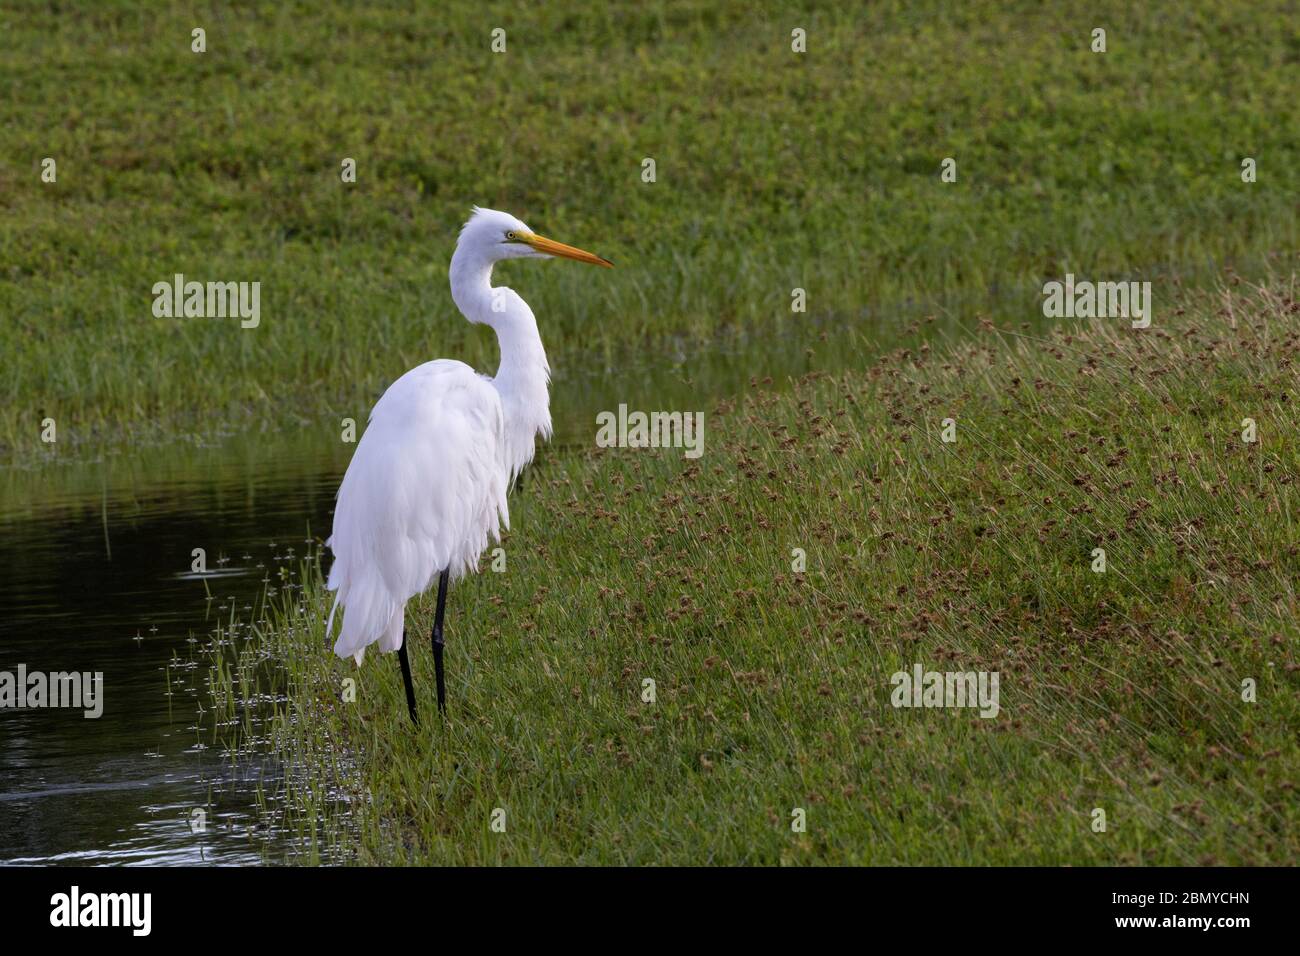 Graceful poise of a Great Egret in its natural environoment at Fort De Soto County Park in Florida. Stock Photo